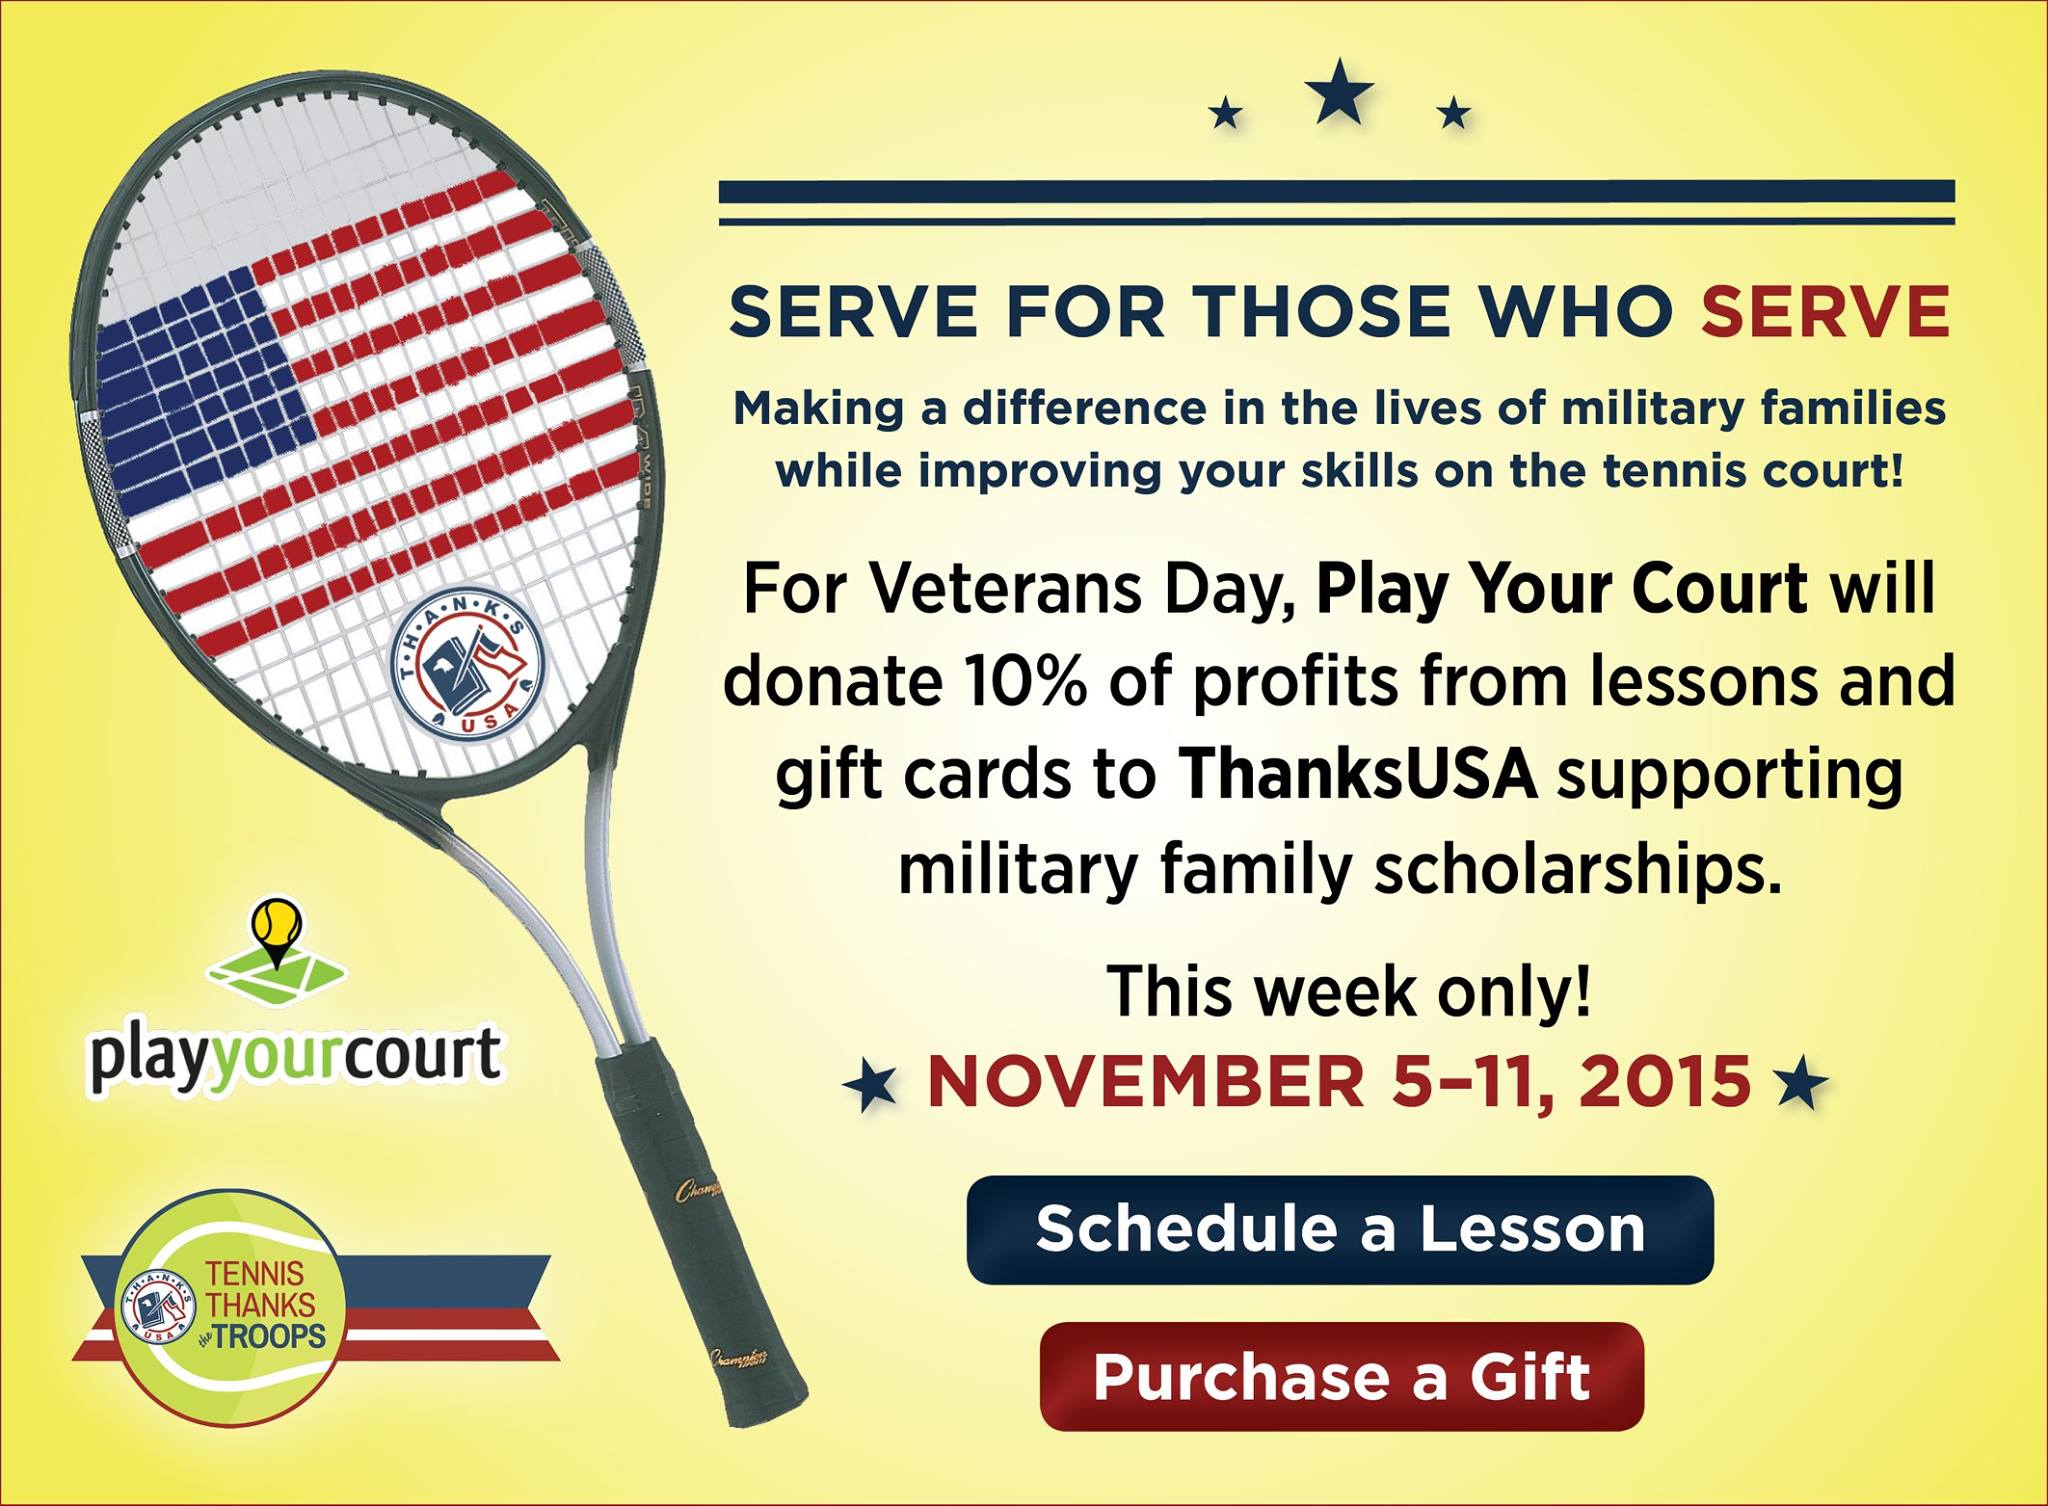 PlayYourCourt Partners with ThanksUSA & Tennis Thanks The Troops